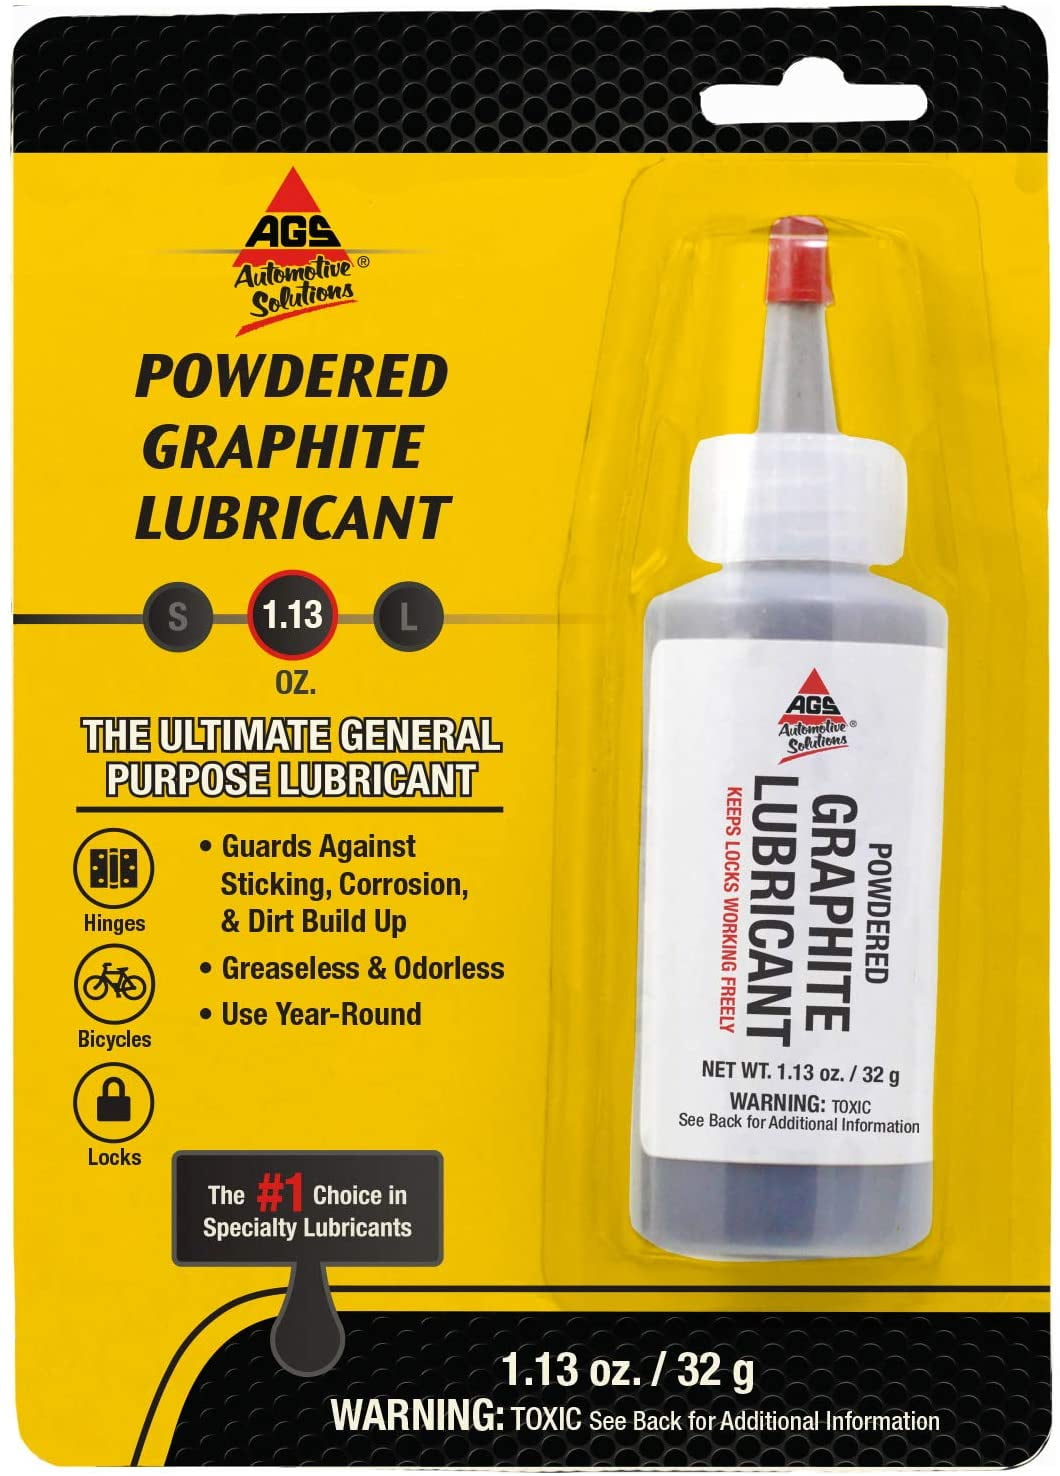 Dry Powdered Graphite Tube-O-Lube for metal wood or plastic